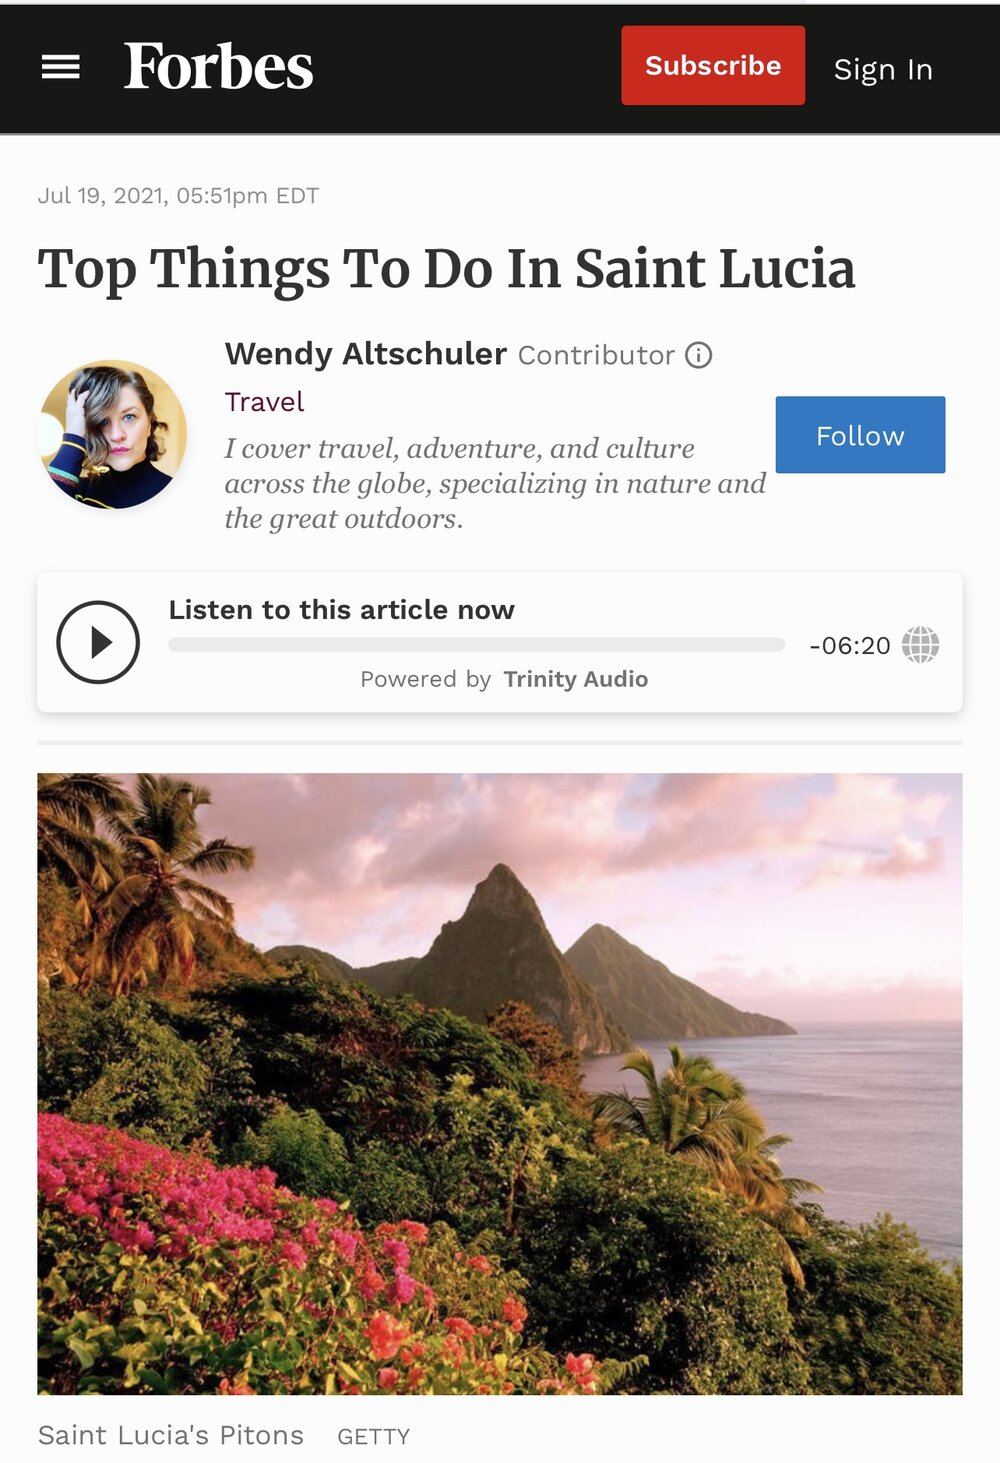 Top Things To Do In Saint Lucia